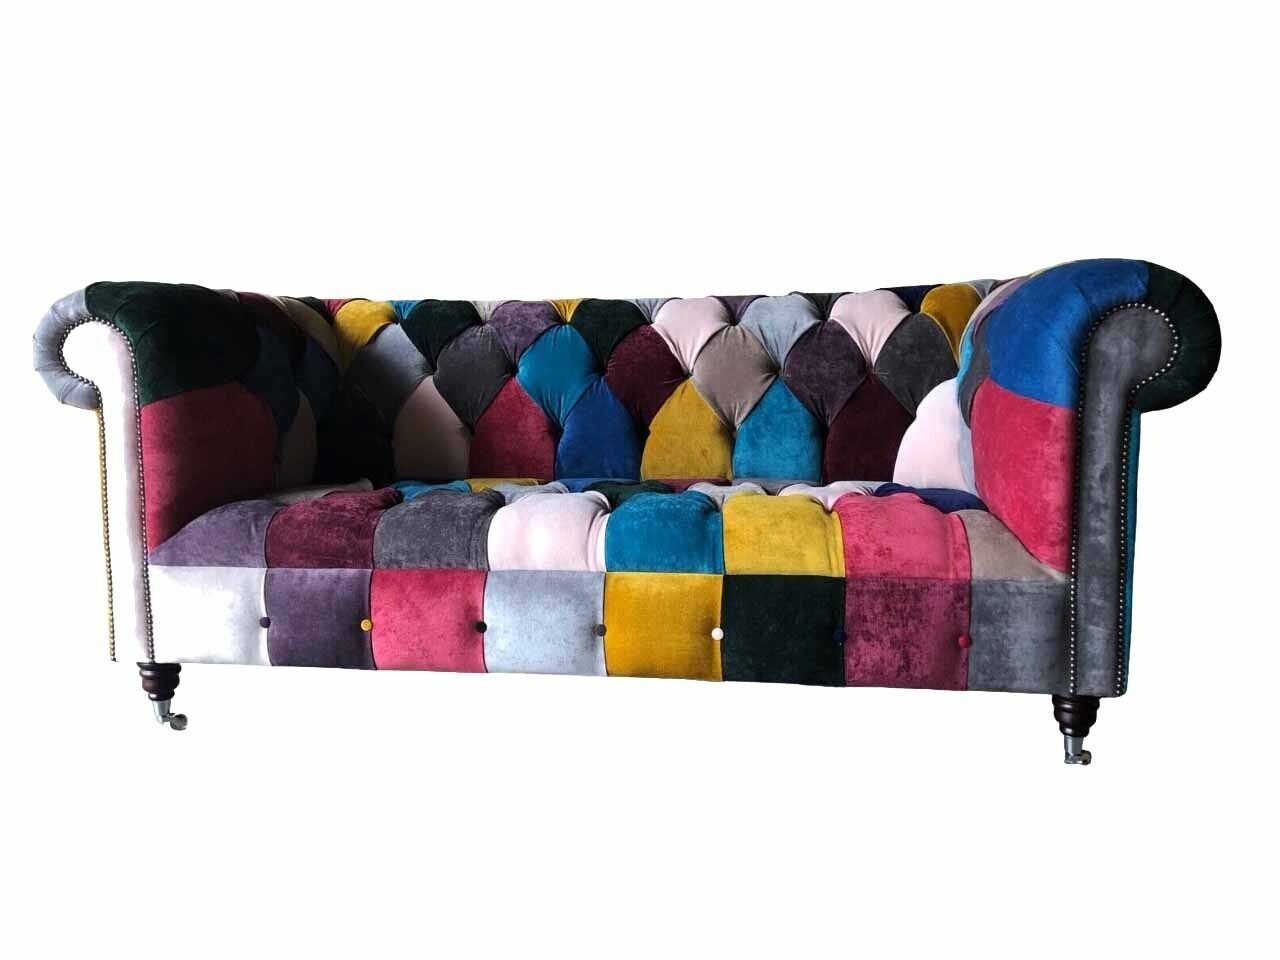 JVmoebel Sofa Bunter Chesterfield Sofa 3 Sitzer Couch Polster Sofas Luxus Stoff, Made in Europe